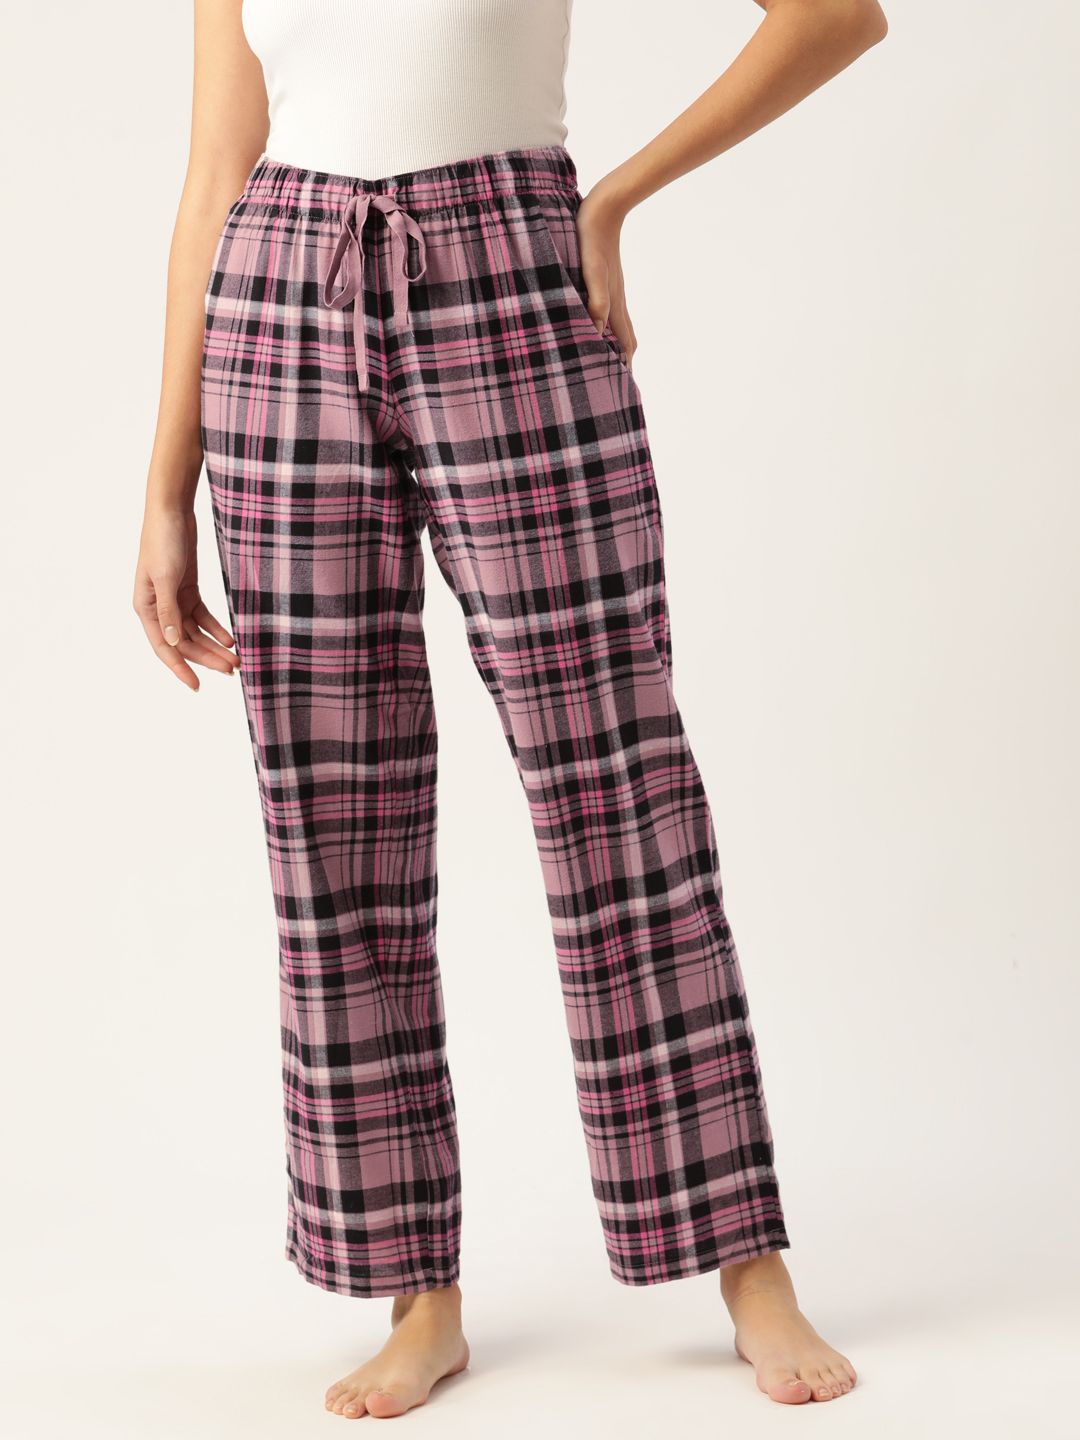 Macy's Jenni Women Pink & Black Checked Yarn-Dyed Cotton Twill Lounge Pants Price in India